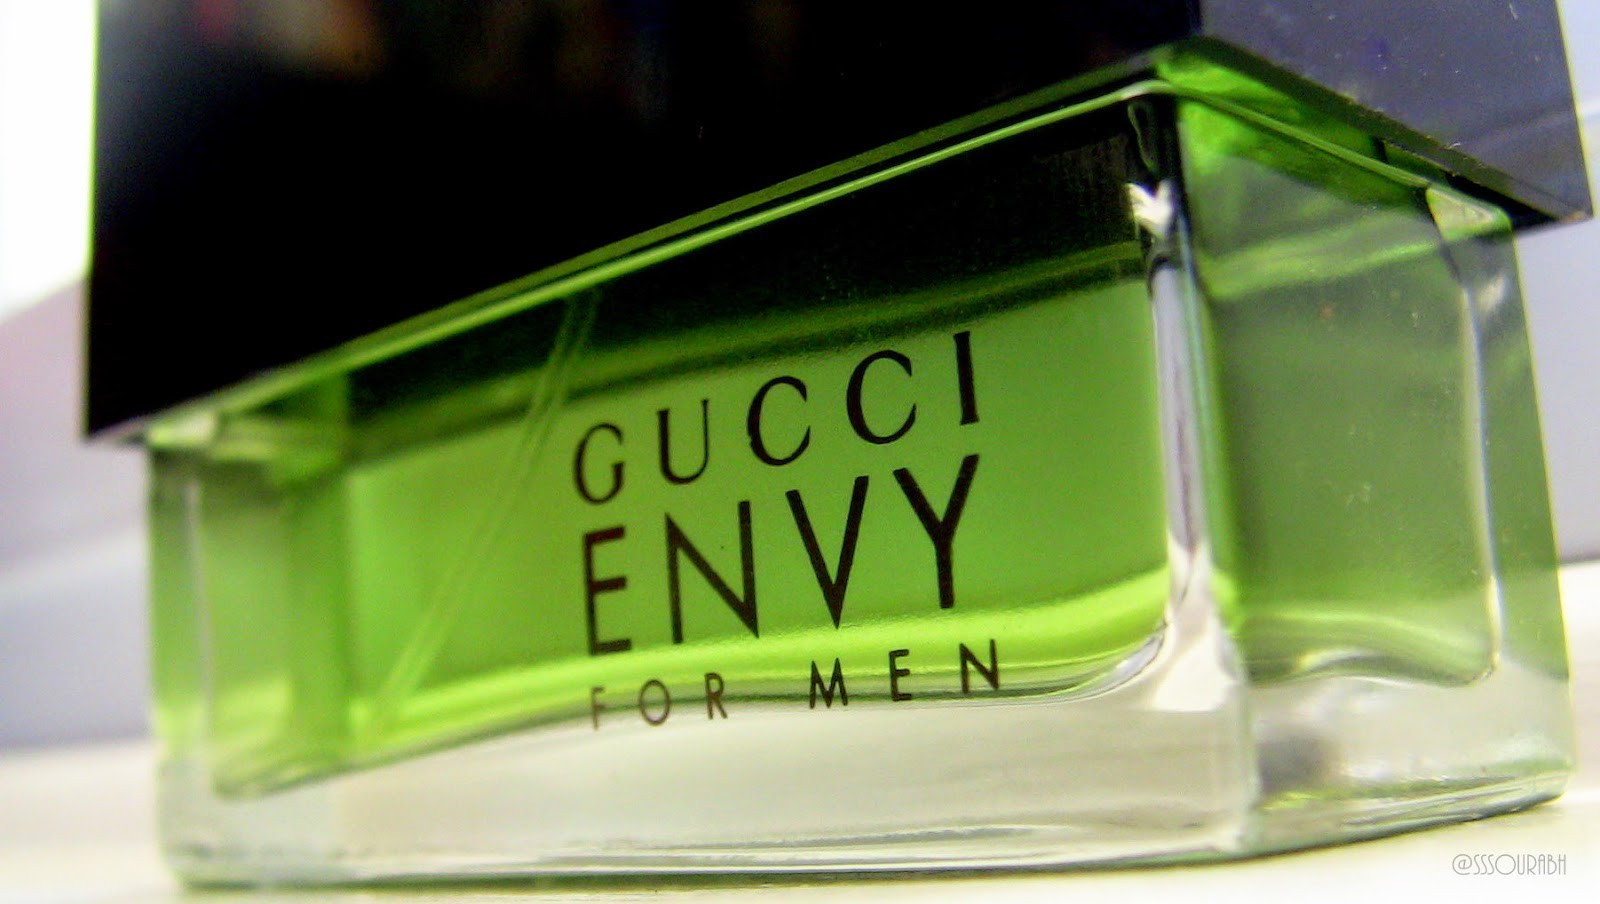 Click image for larger version  Name:	gucci envy.jpg Views:	6 Size:	200.2 KB ID:	181048